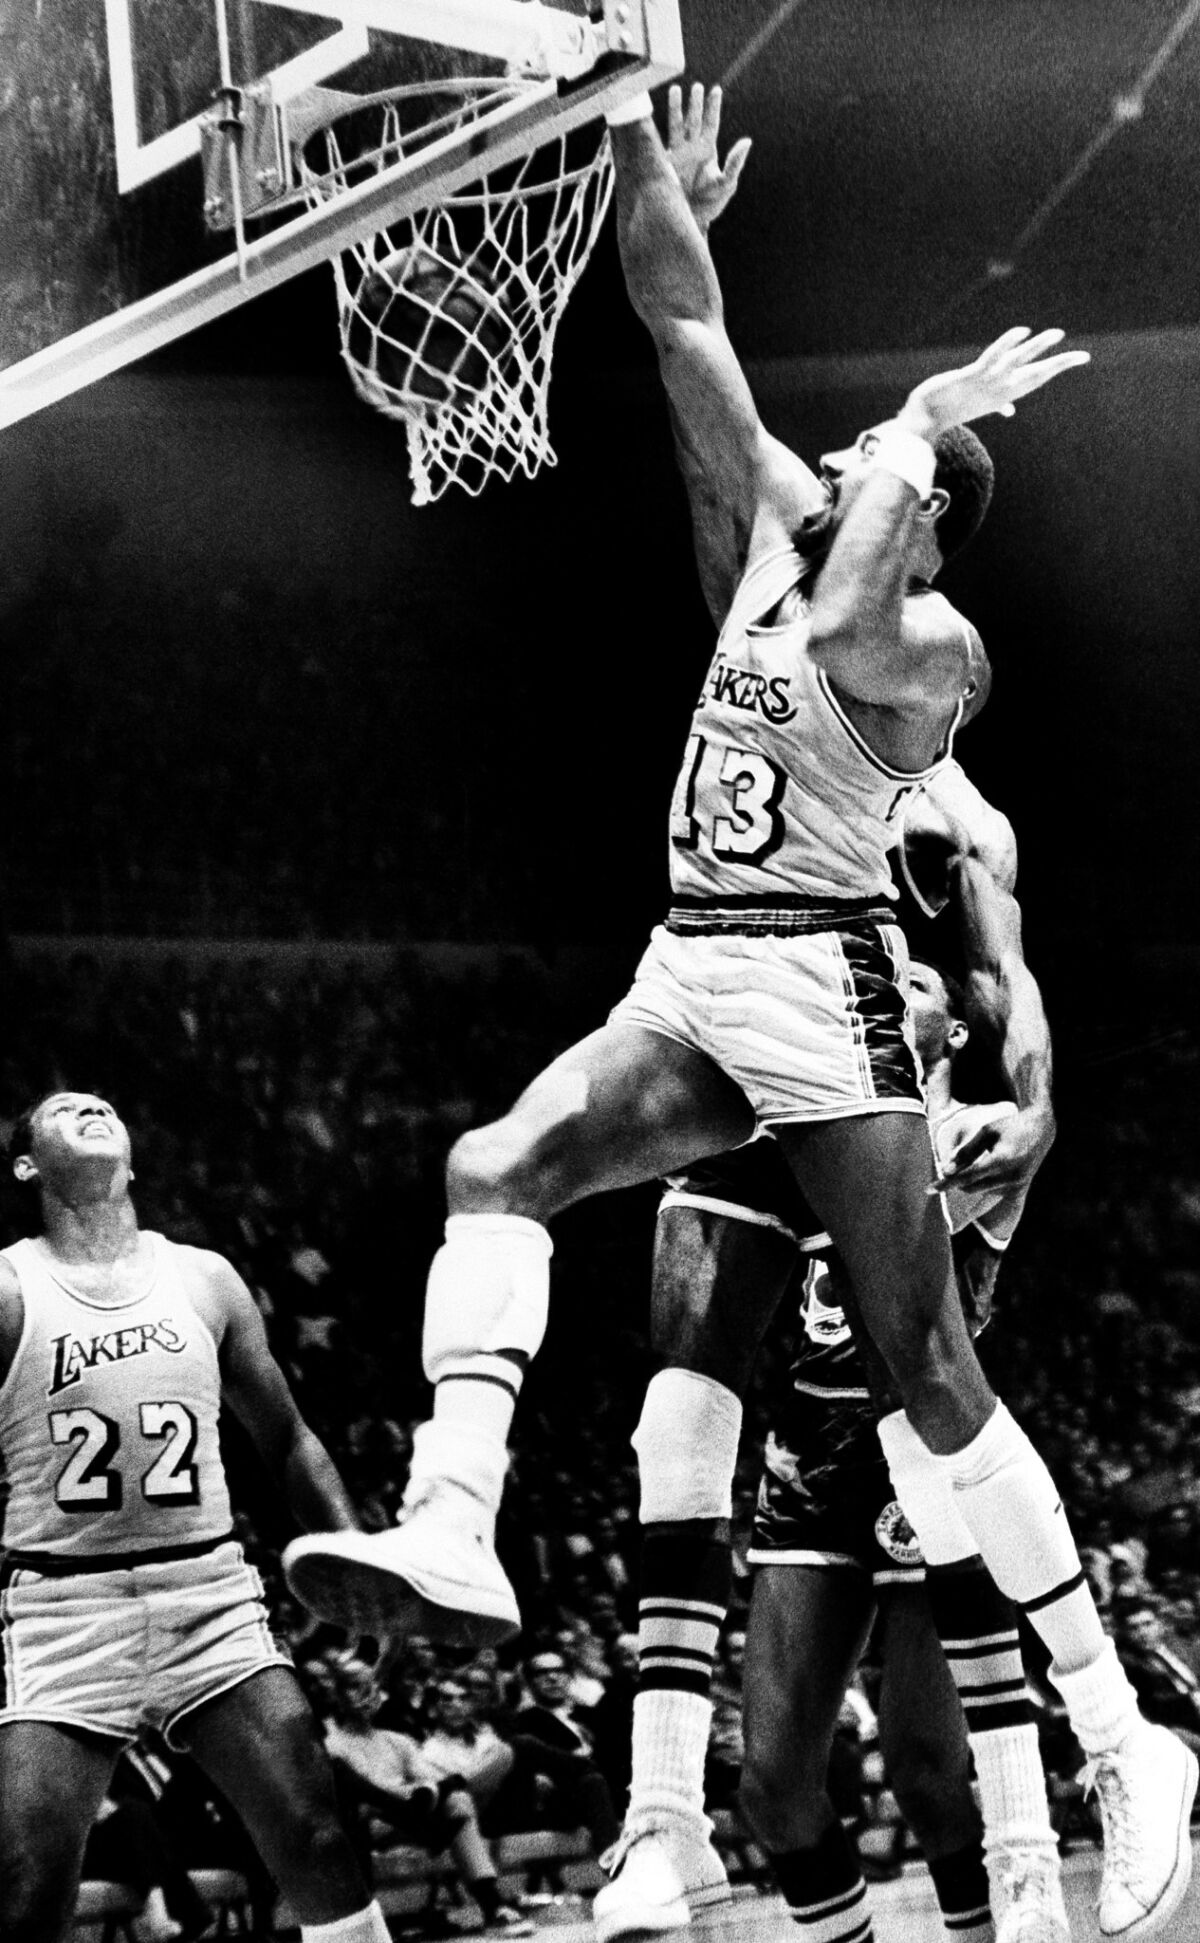 Wilt Chamberlain in his home court debut, drives in for a basket during National Basketball Association exhibition game against the San Francisco Warriors at the Forum in Inglewood, Calif., October 1, 1968.